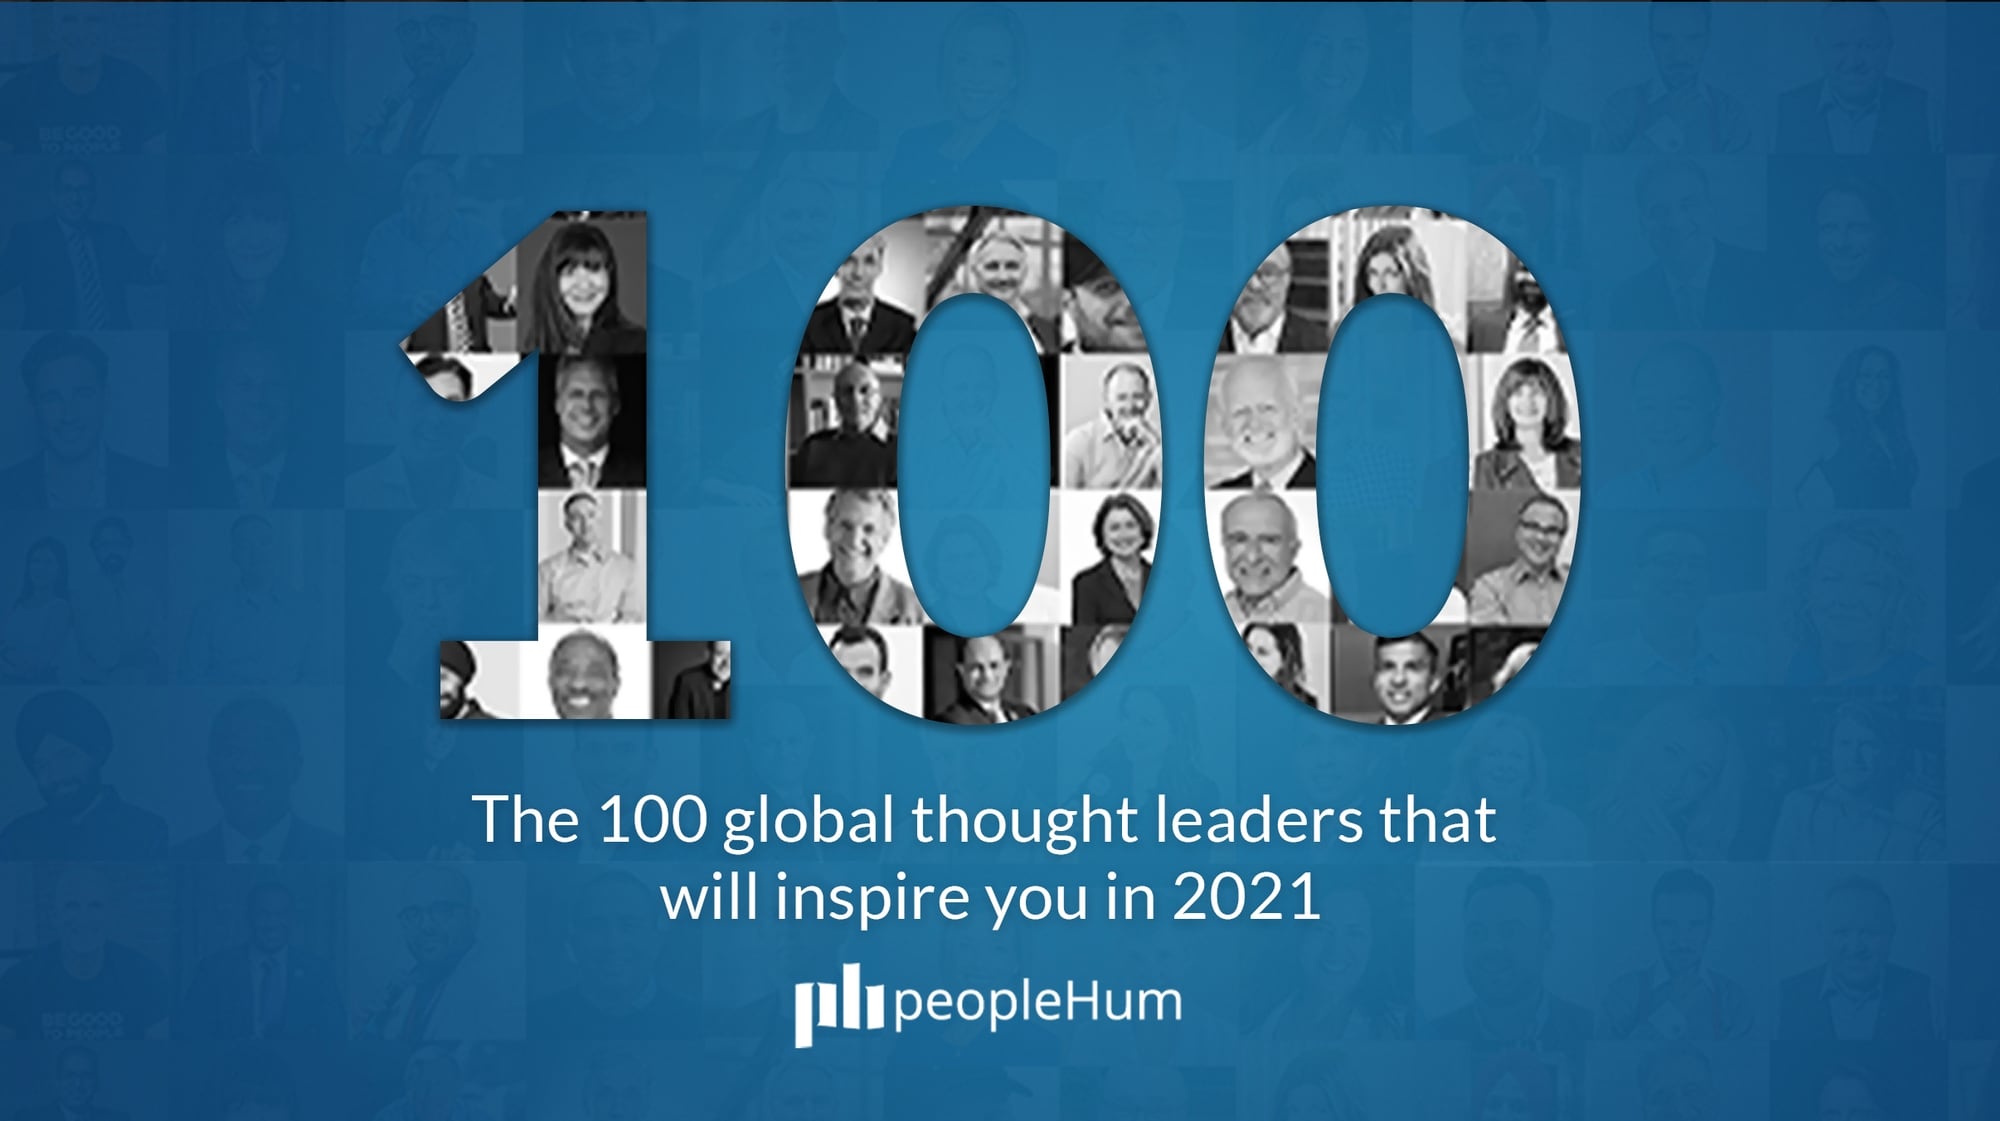 The 100 global thought leaders that will inspire you in 2021